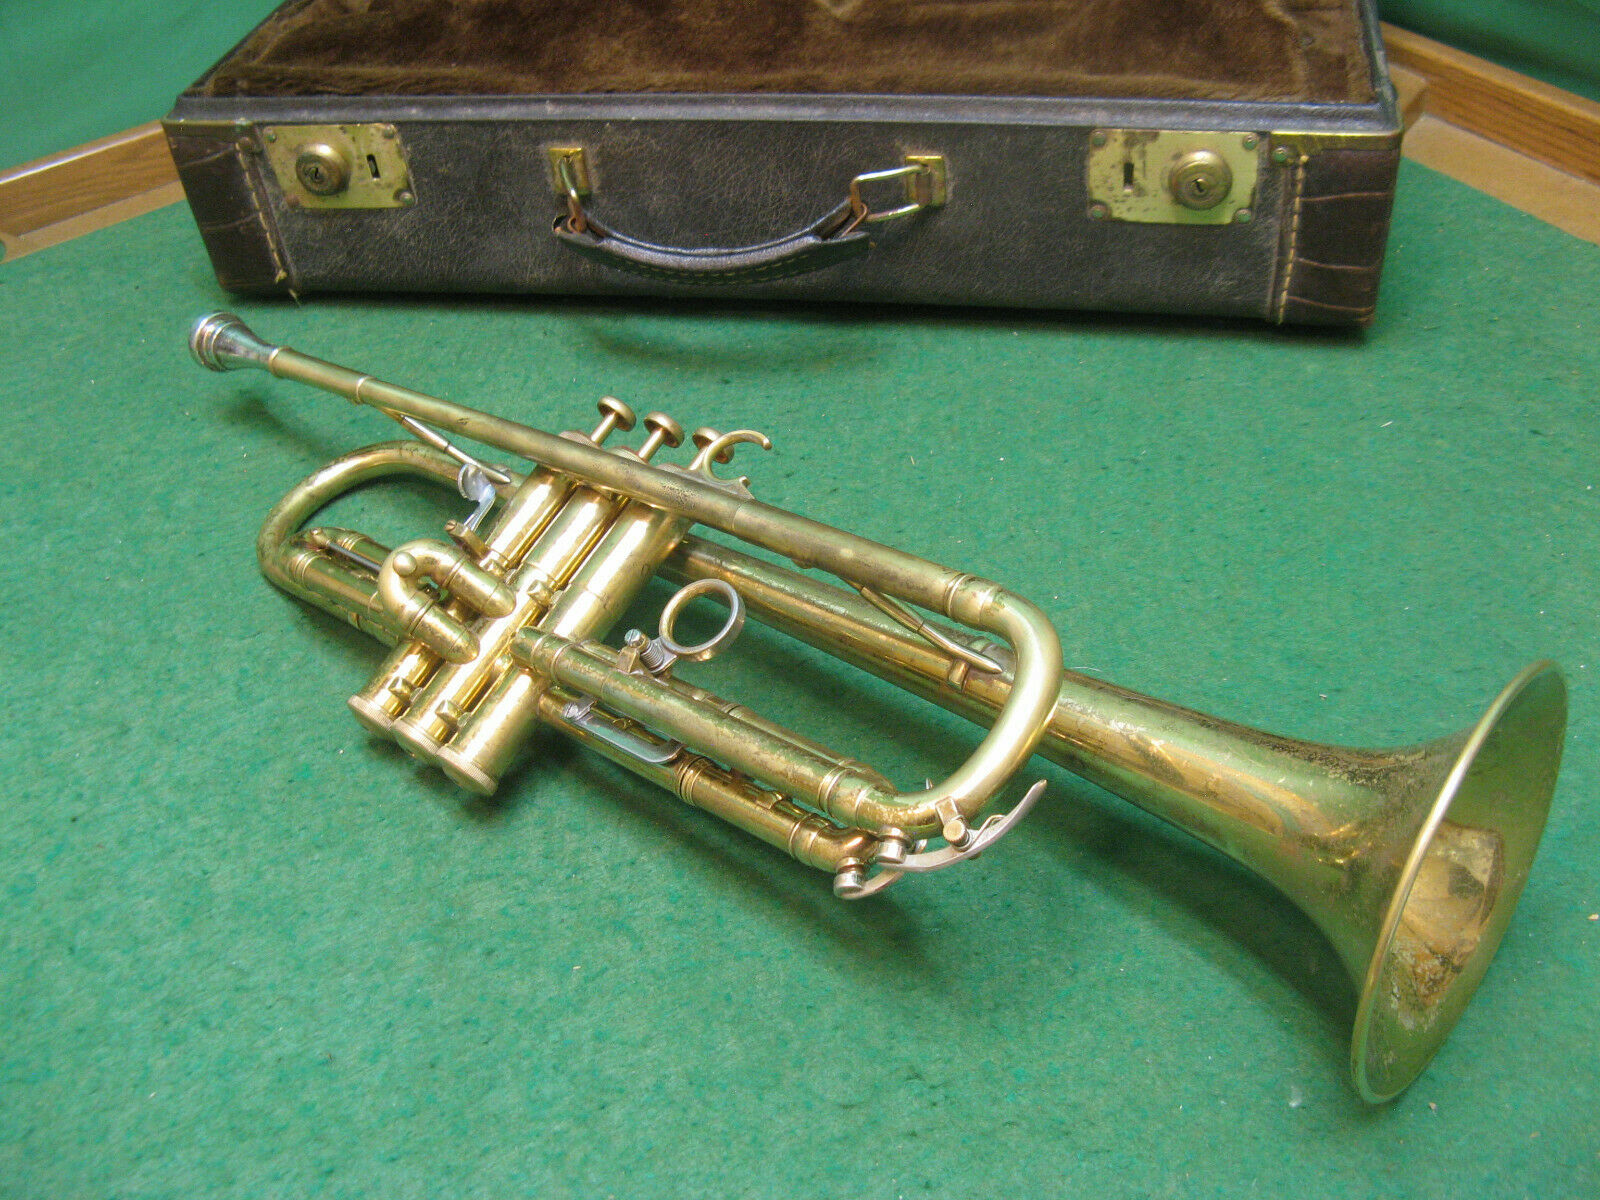 Olds Mendez Trumpet 1955 - 1st Year Fullerton - Hard Case And Mendez Mouthpiece